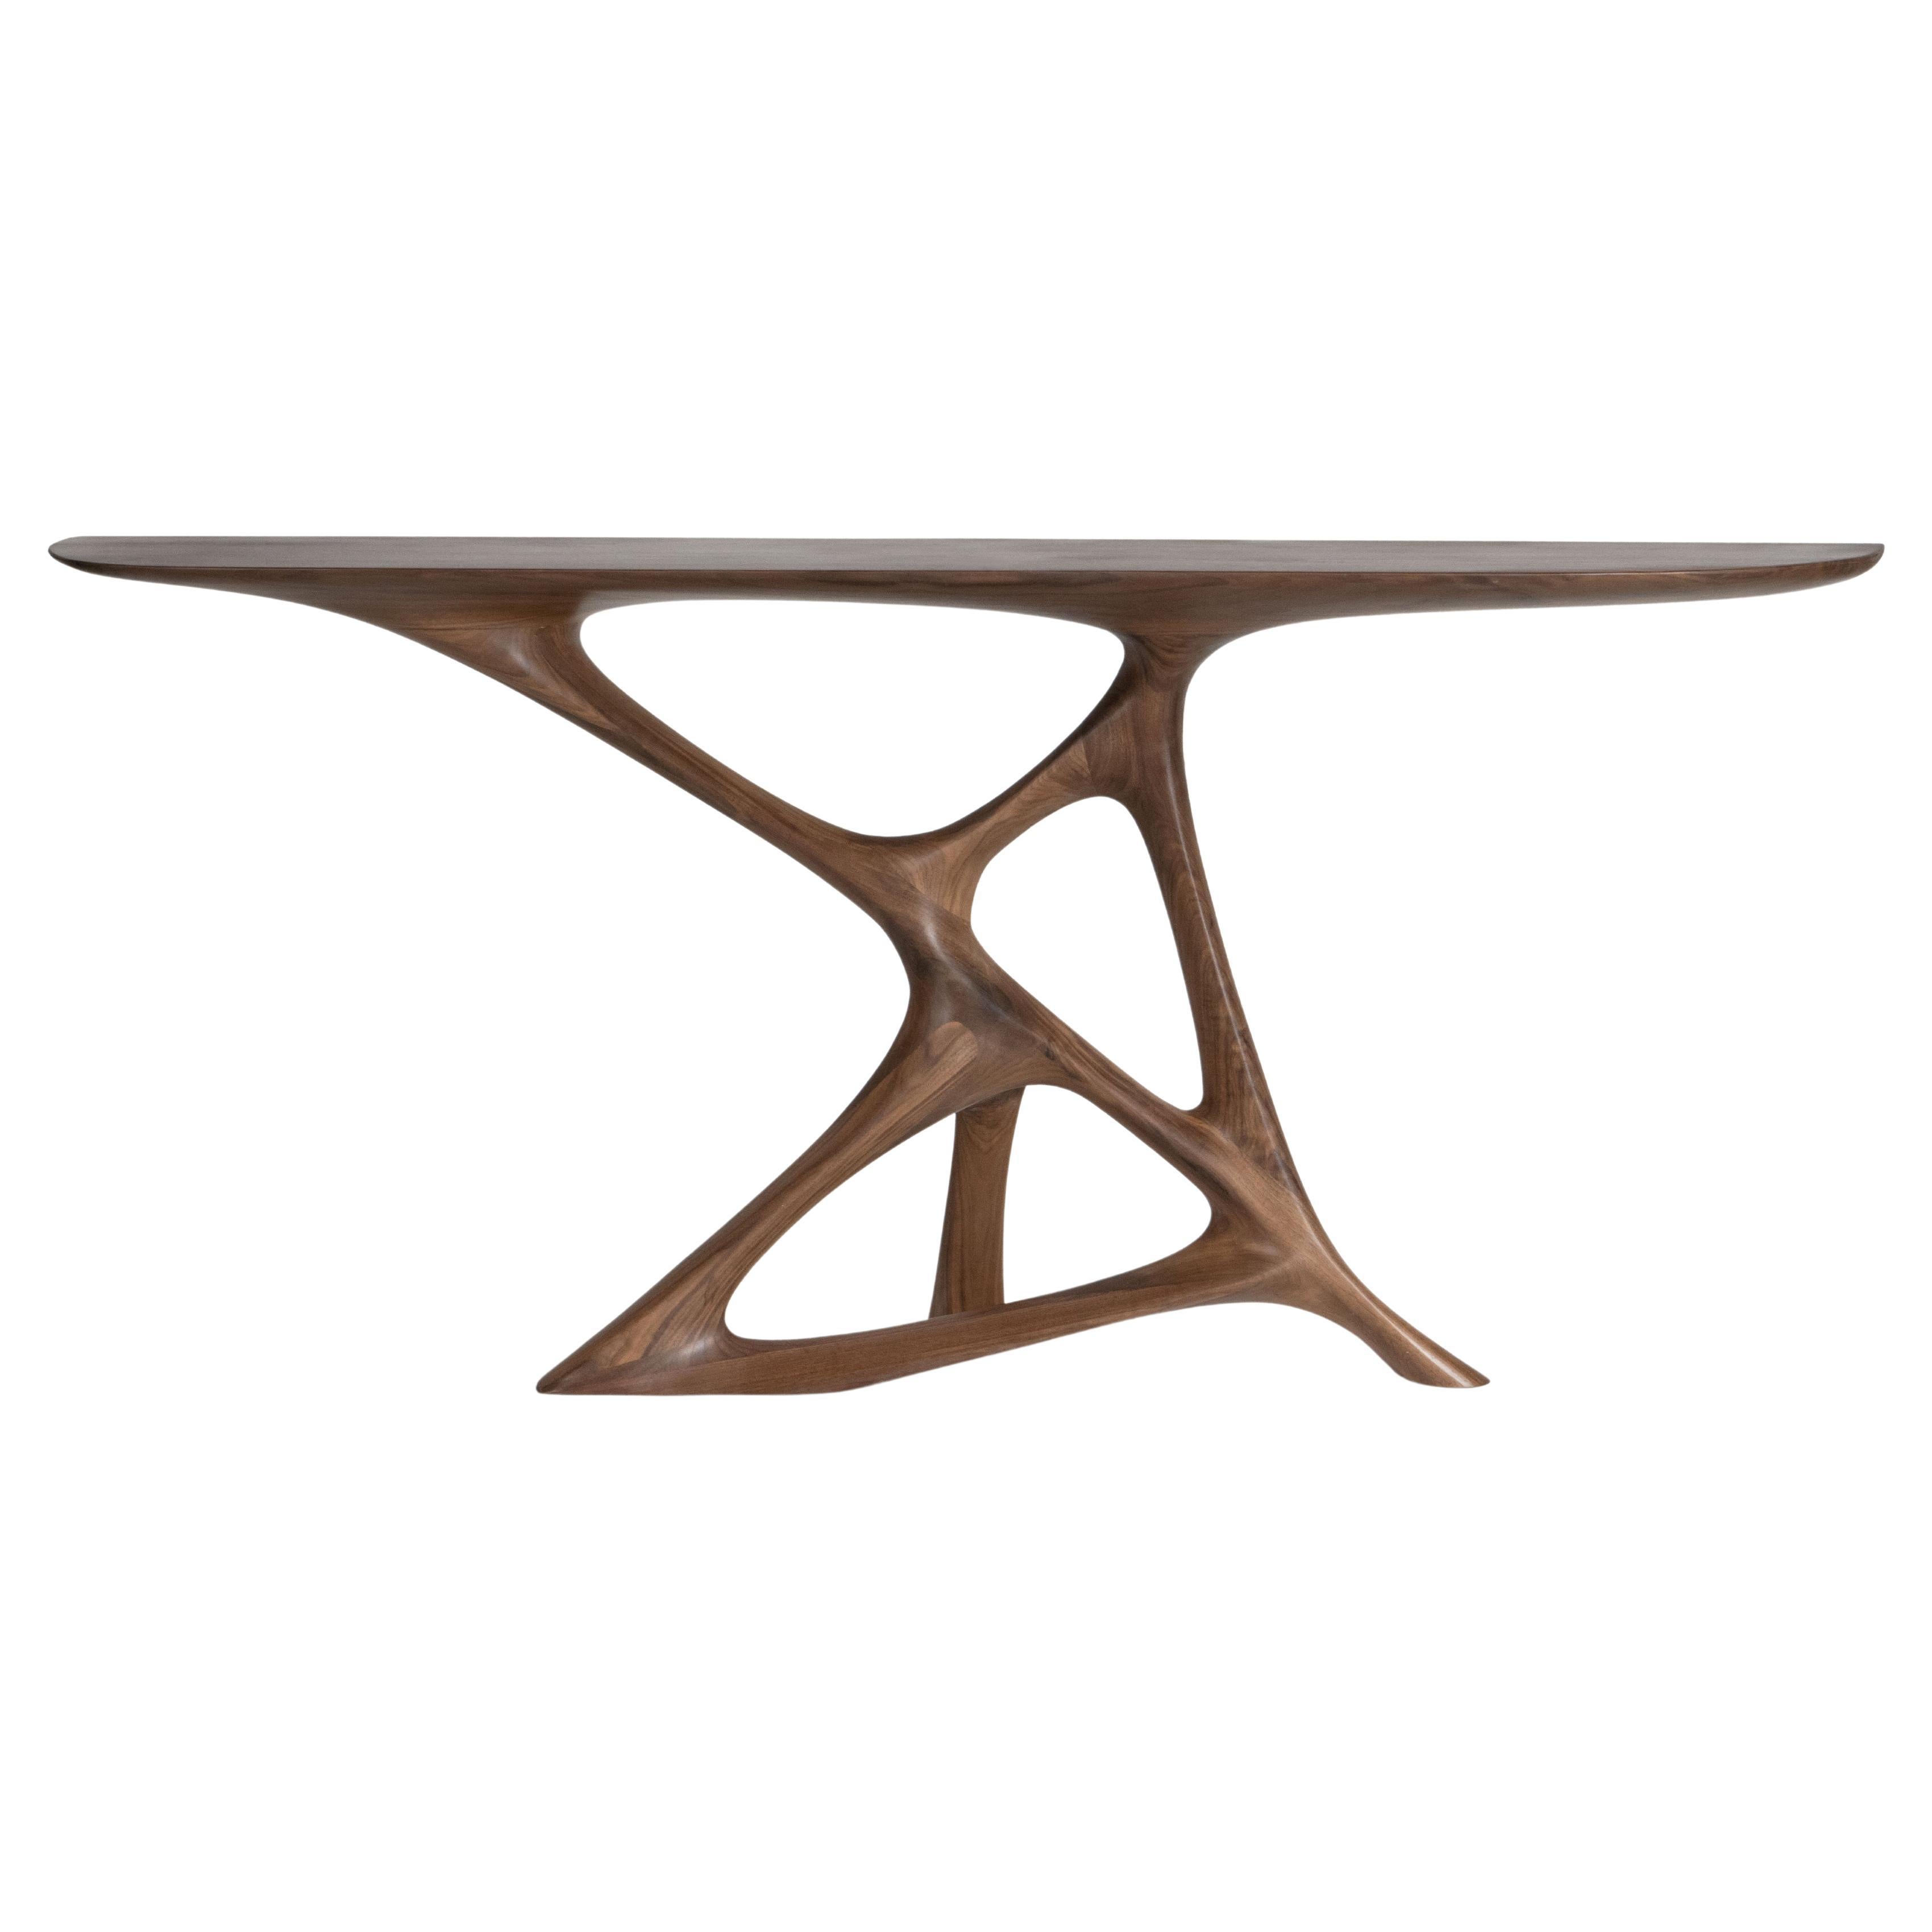 Amorph Anika Console table in Natural stain on Walnut wood For Sale